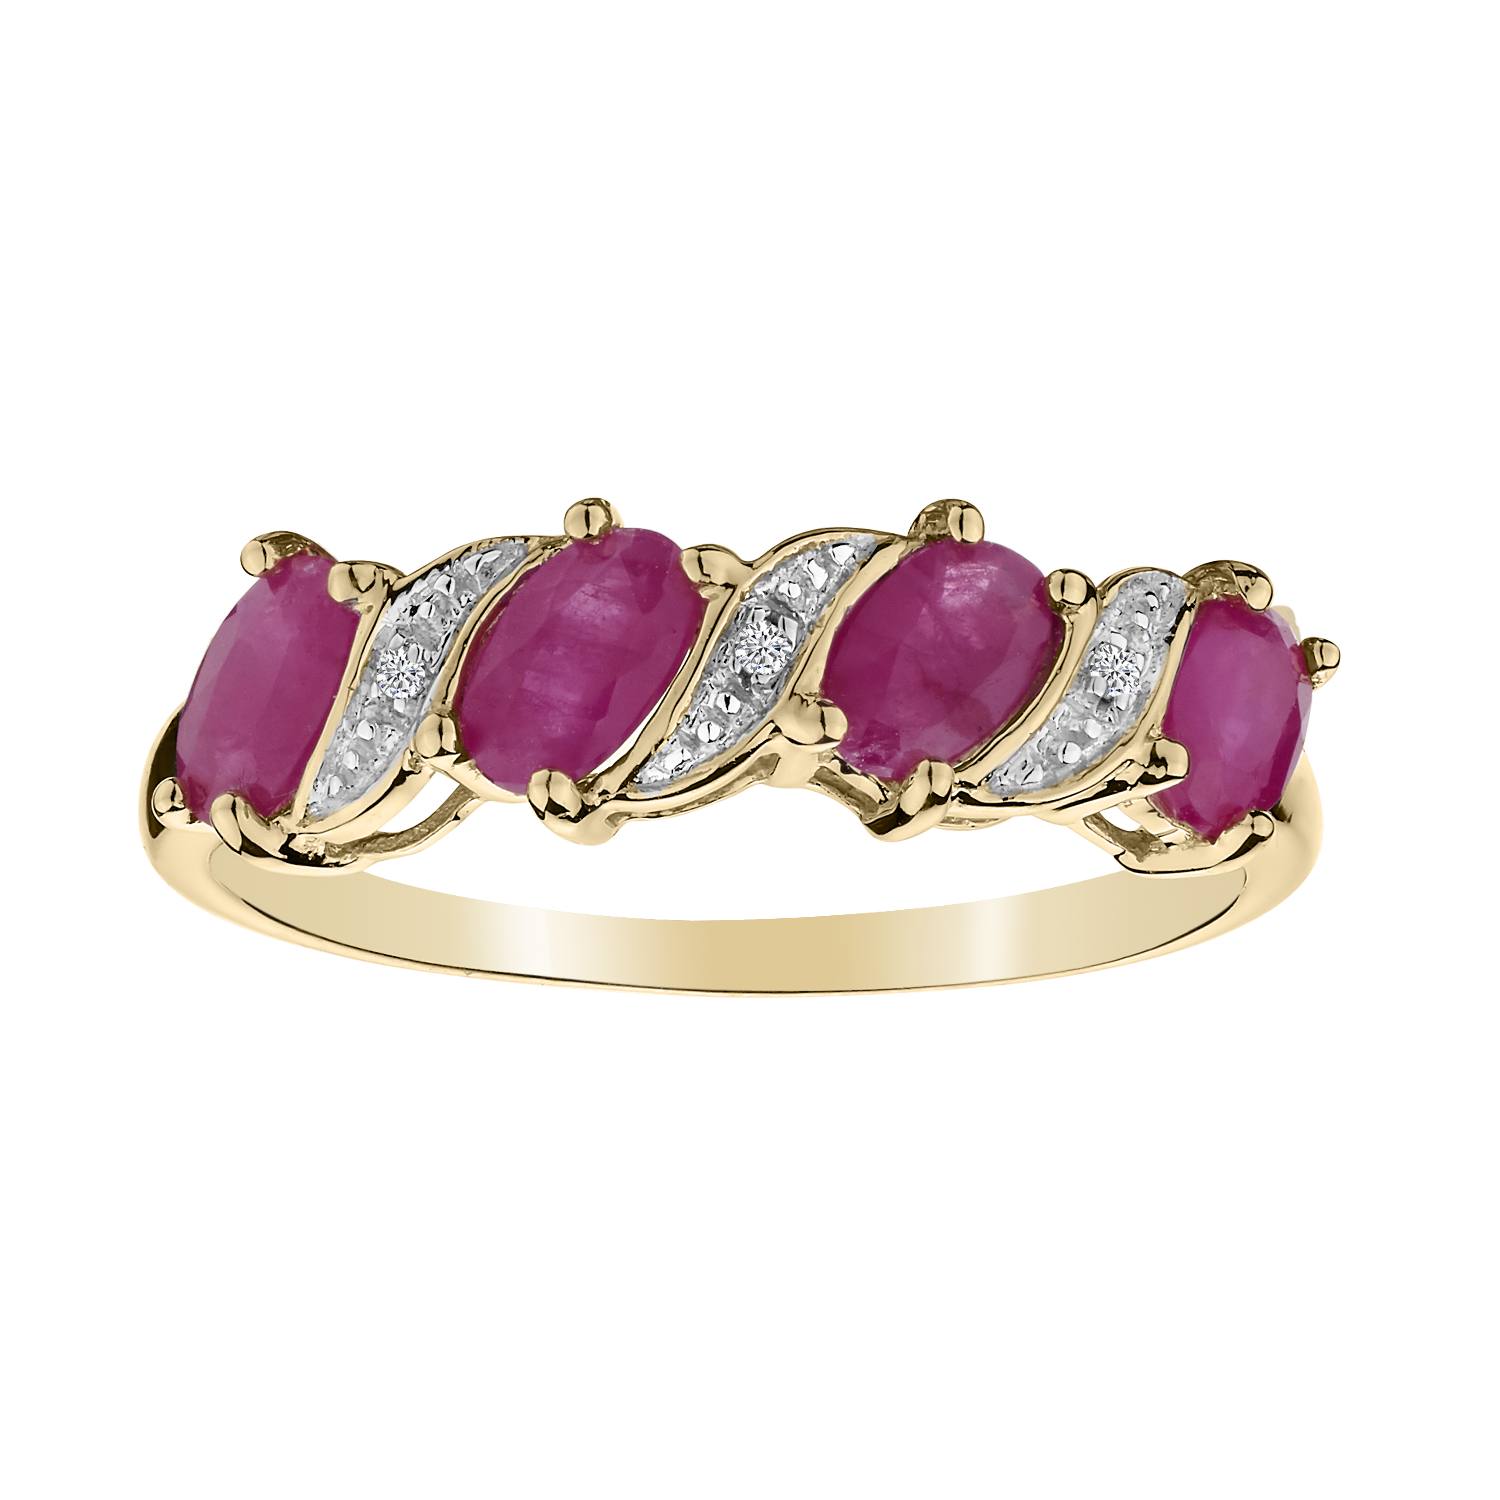 Genuine Ruby Diamond Ring,  10kt Yellow Gold. Gemstone Rings. Griffin Jewellery Designs